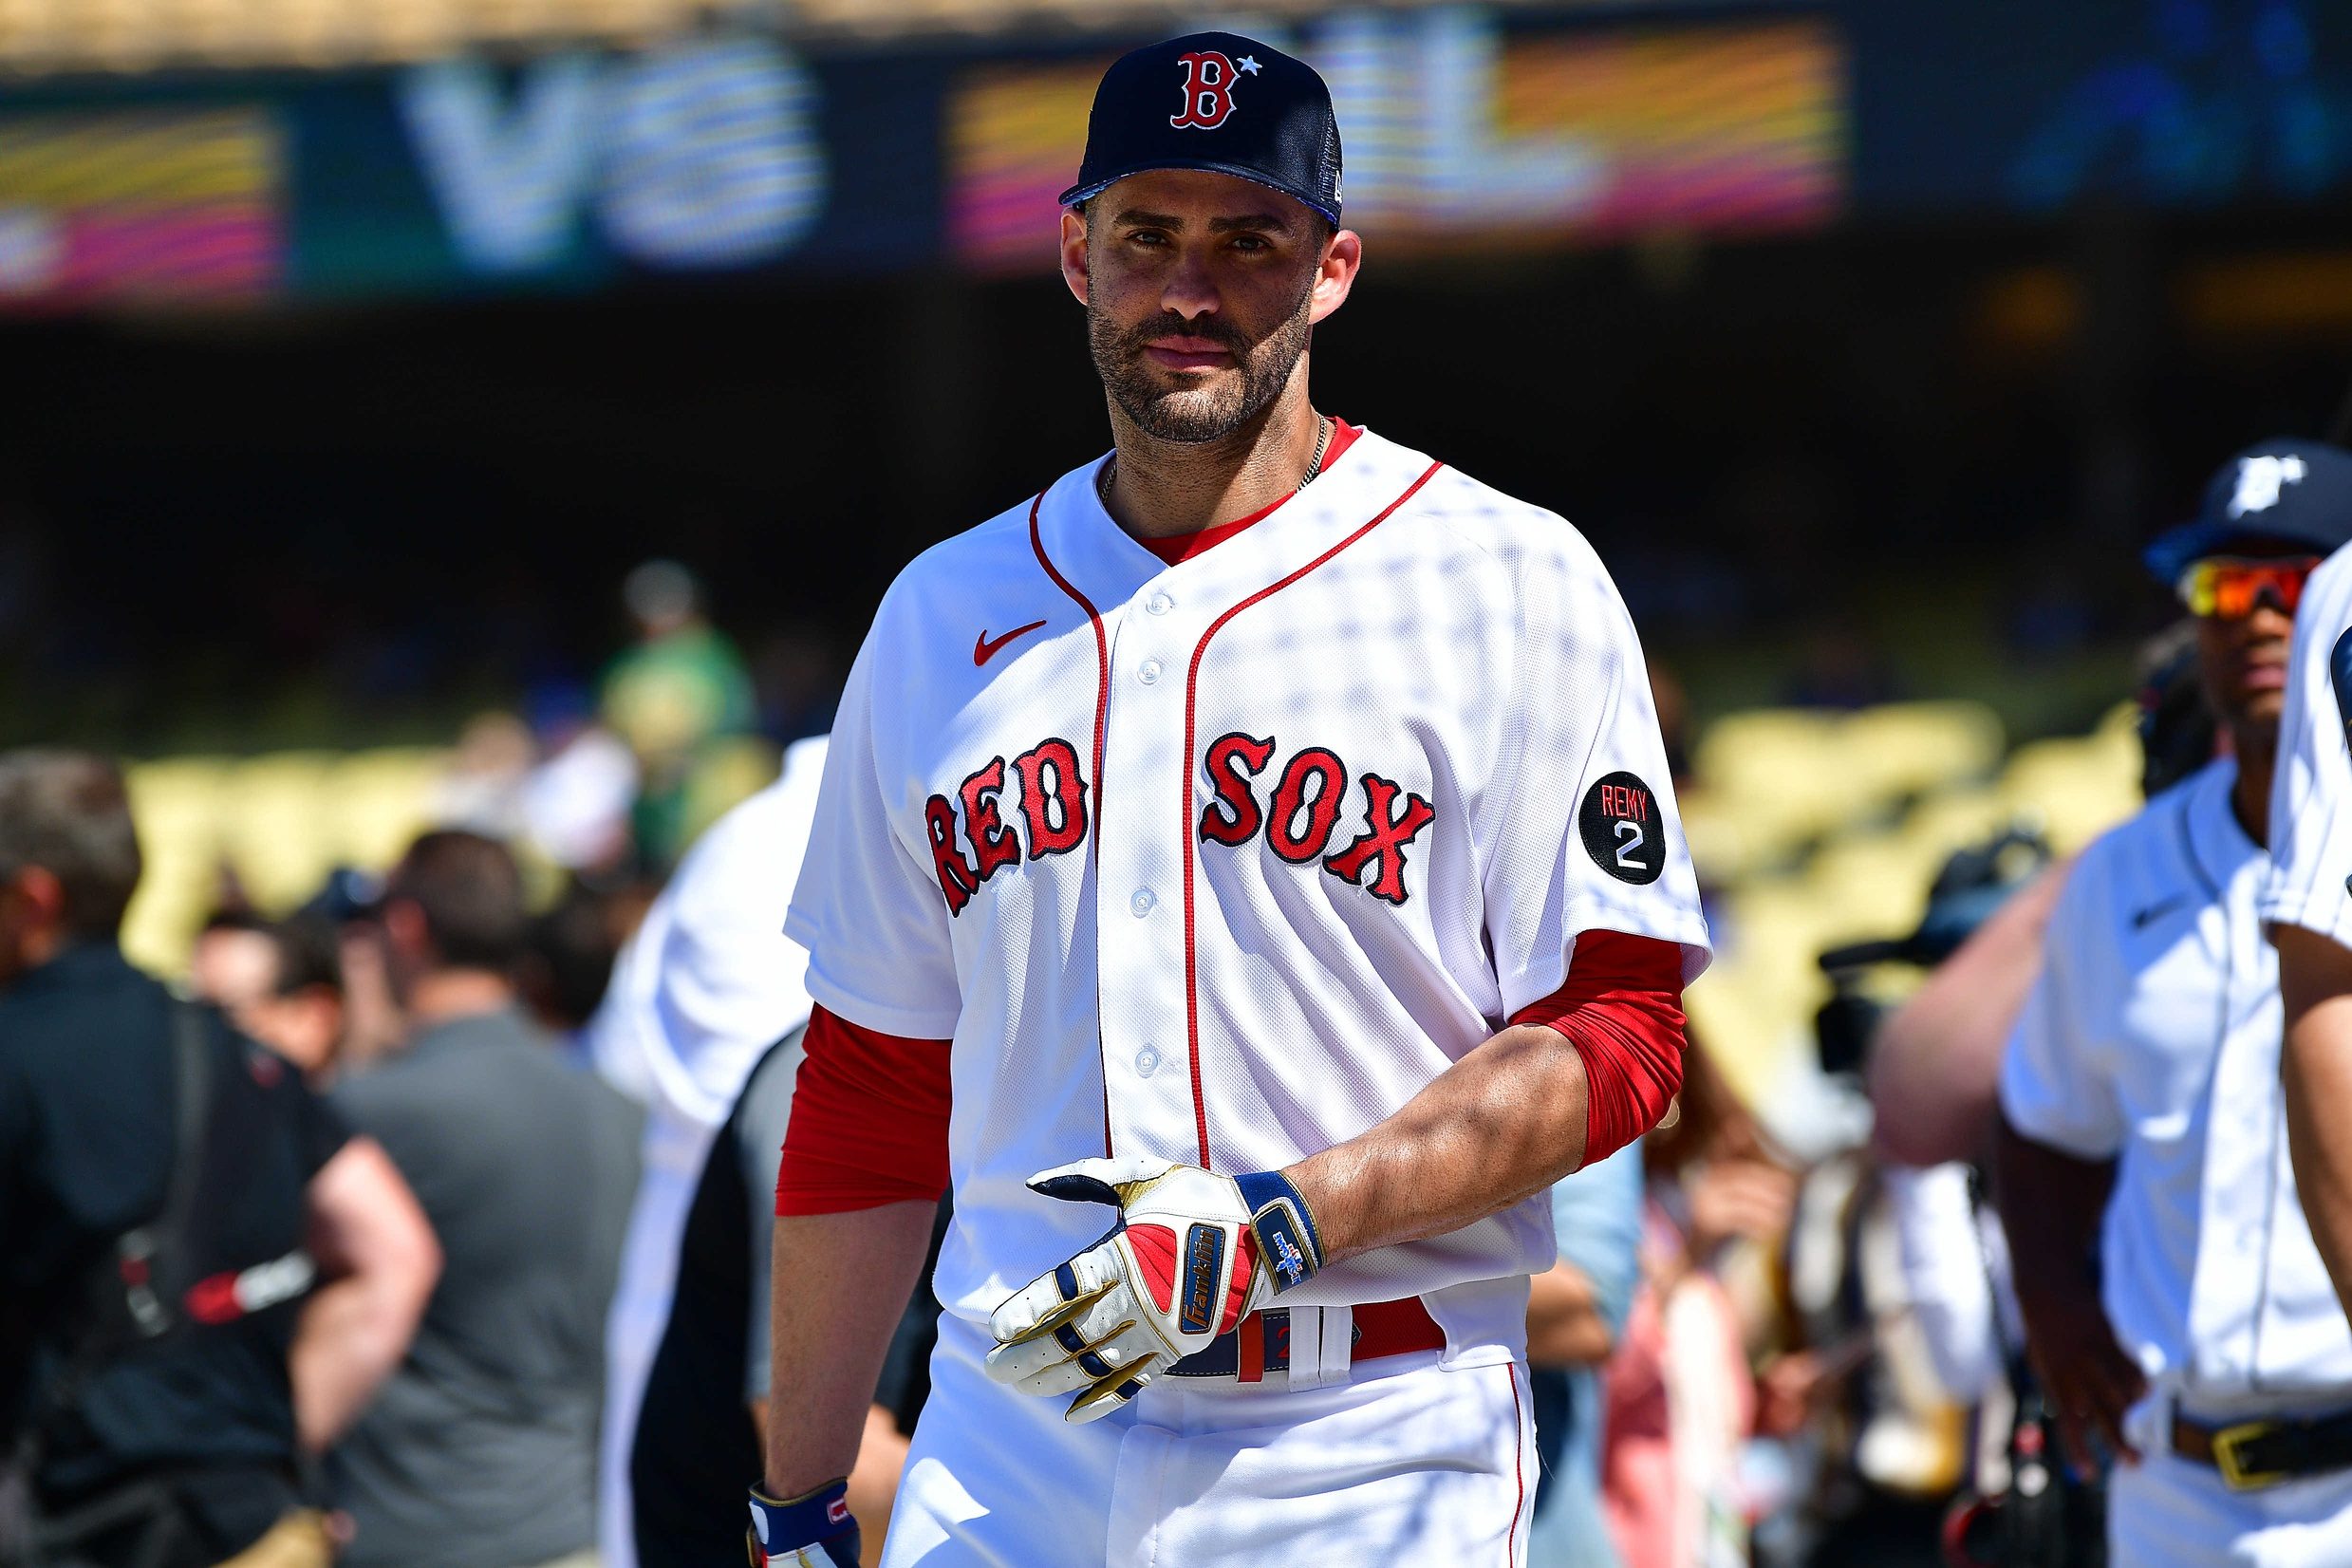 Dodgers: A Look At the Projections for JD Martinez in 2023